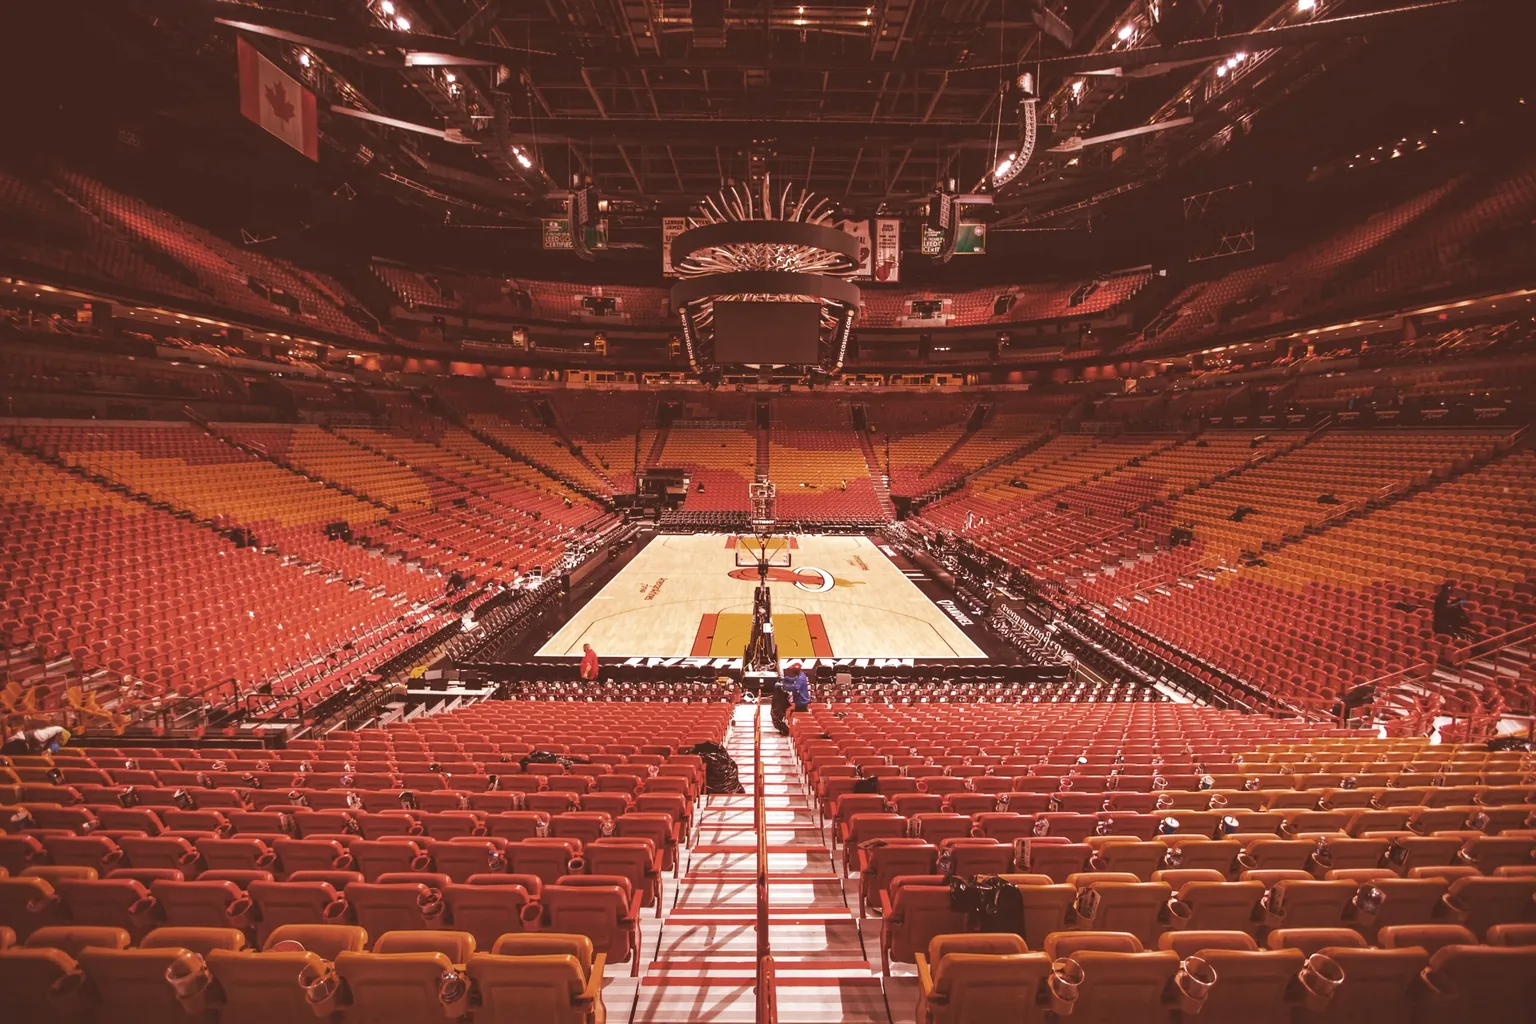 American Airline Arena after a Miami Heat basketball game on March 31, 2018. Image: Shutterstock